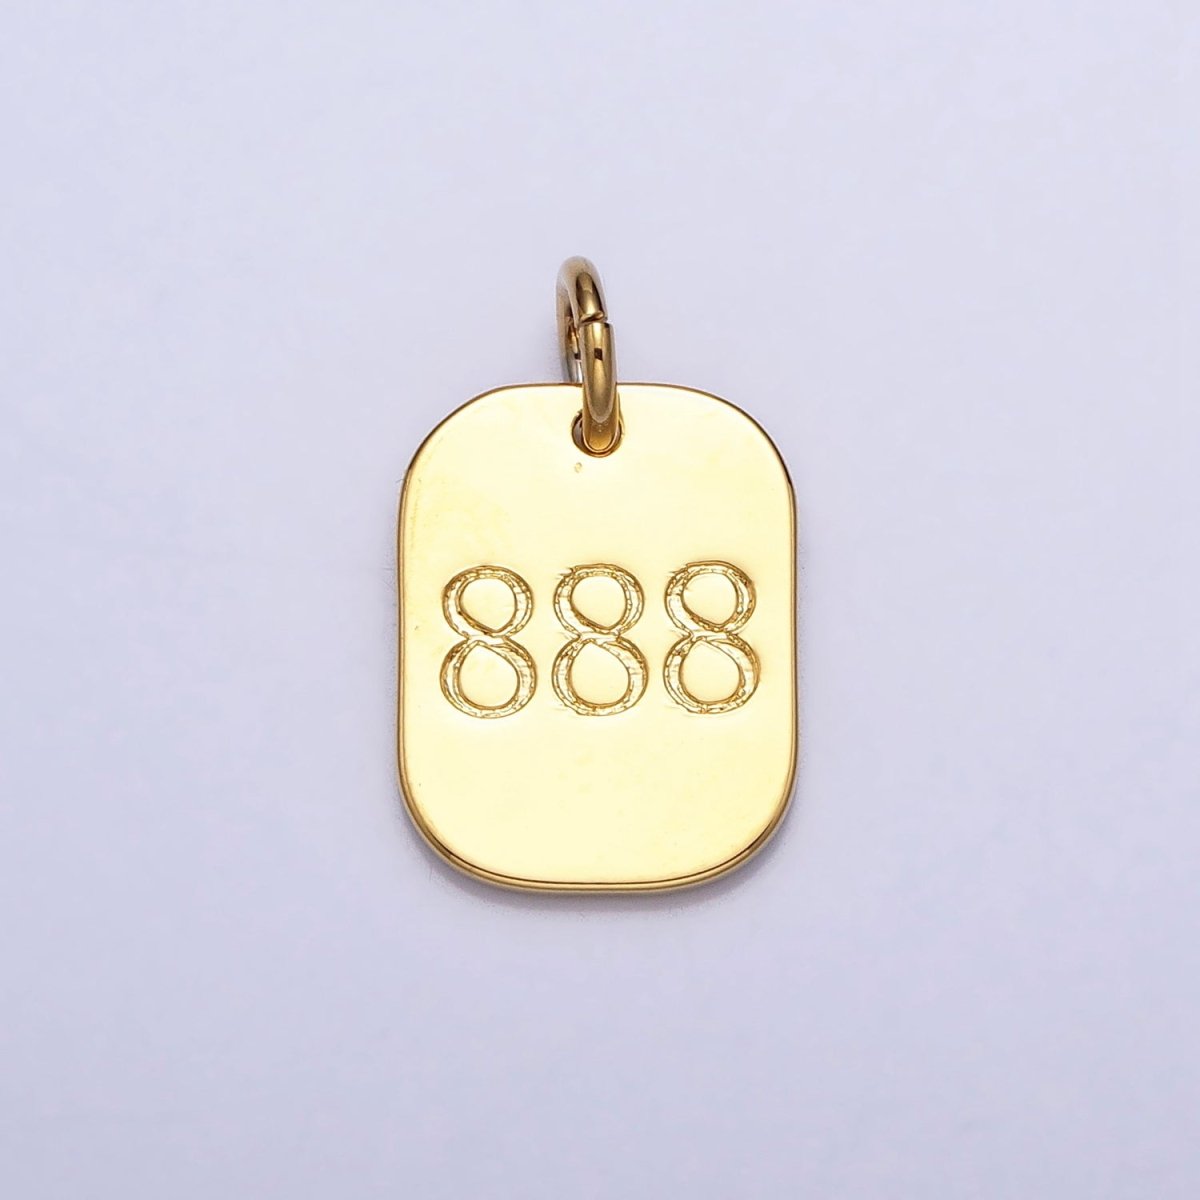 Dainty 24K Gold Filled Angel Number Numerology Engraved Small Military Tag Charm add on Pendant | AD087 - AA096 - DLUXCA